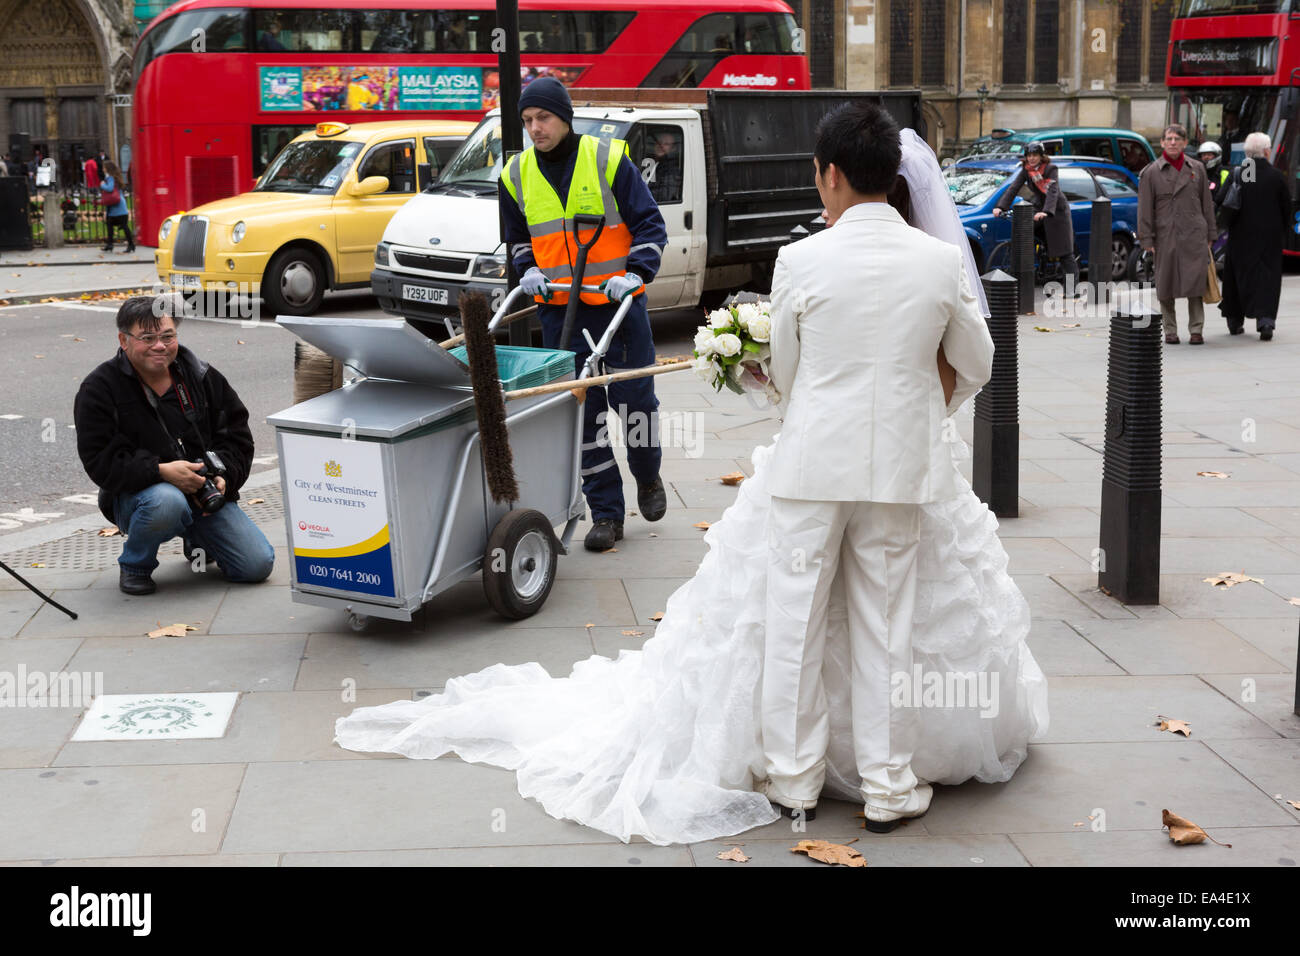 A council street sweeper from Westminster Council walks through a Chinese wedding photo shoot in London Stock Photo